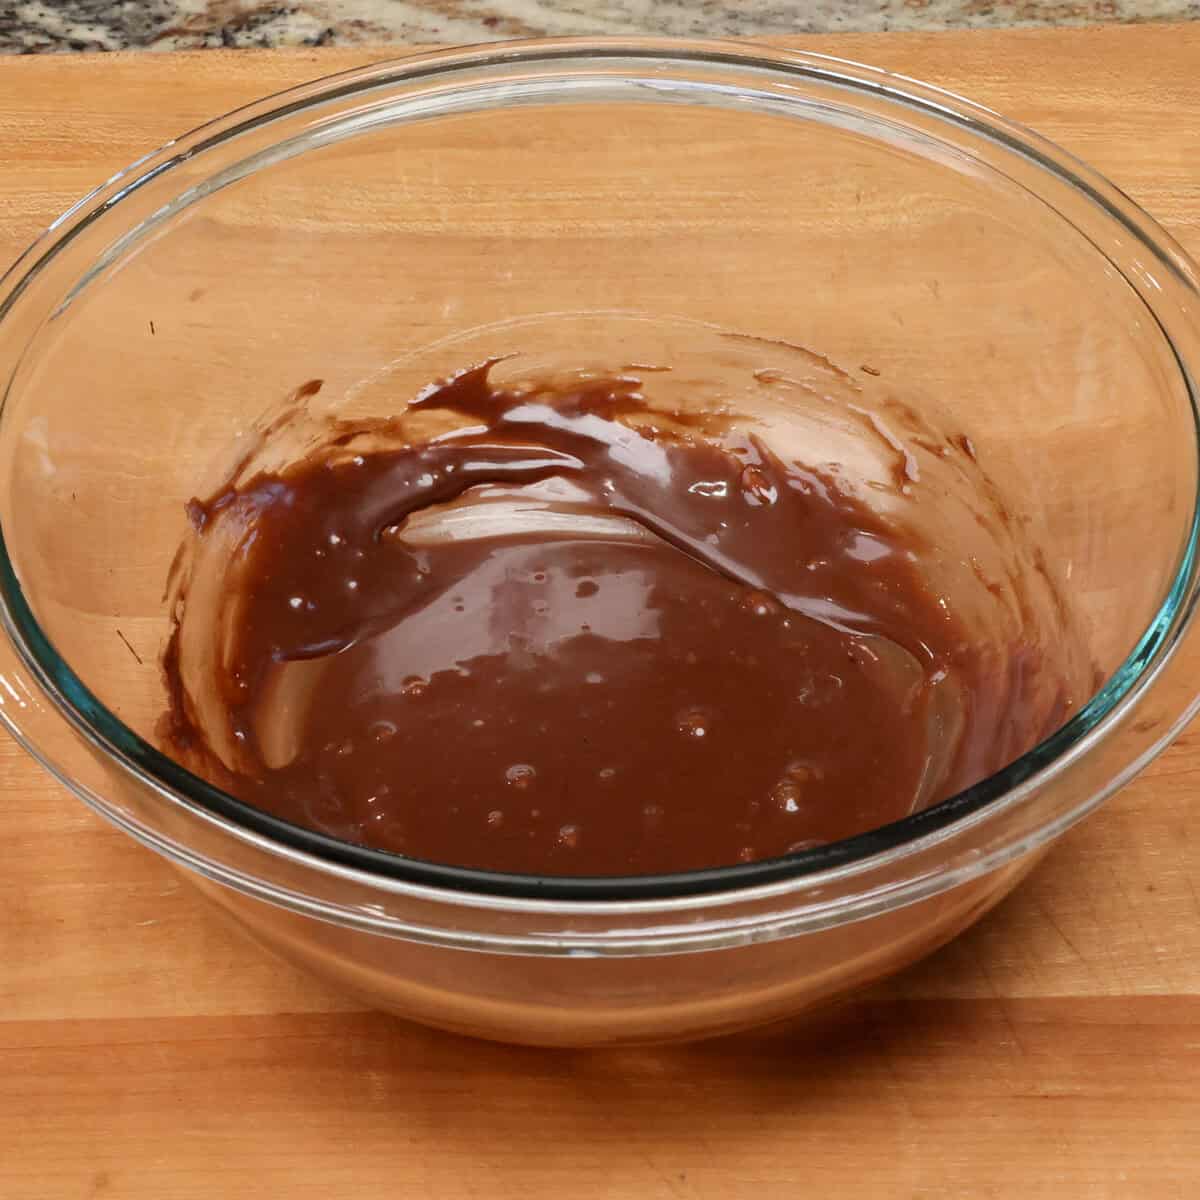 melted chocolate, vanilla, sweetened condensed milk and cocoa powder in a bowl.